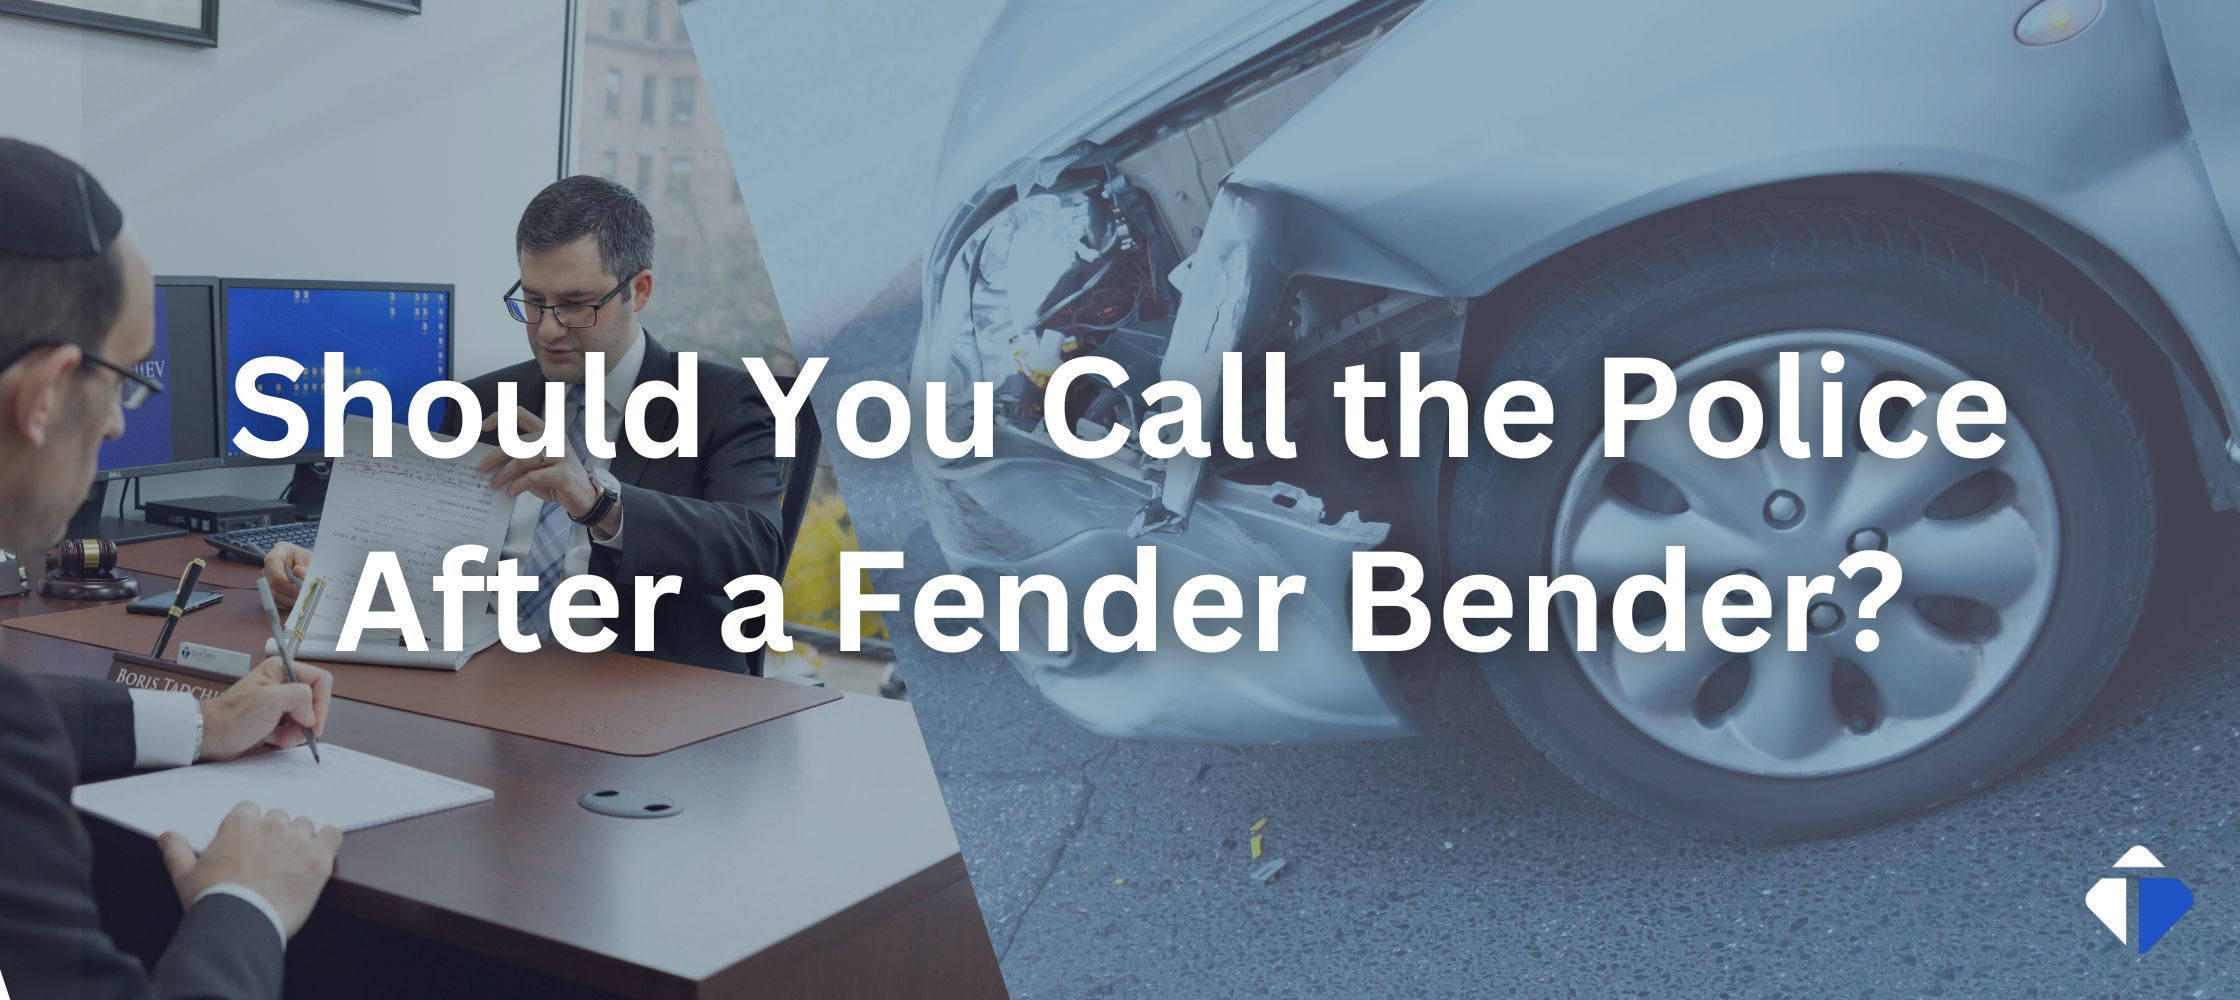 Should You Call the Police After a Fender Bender?